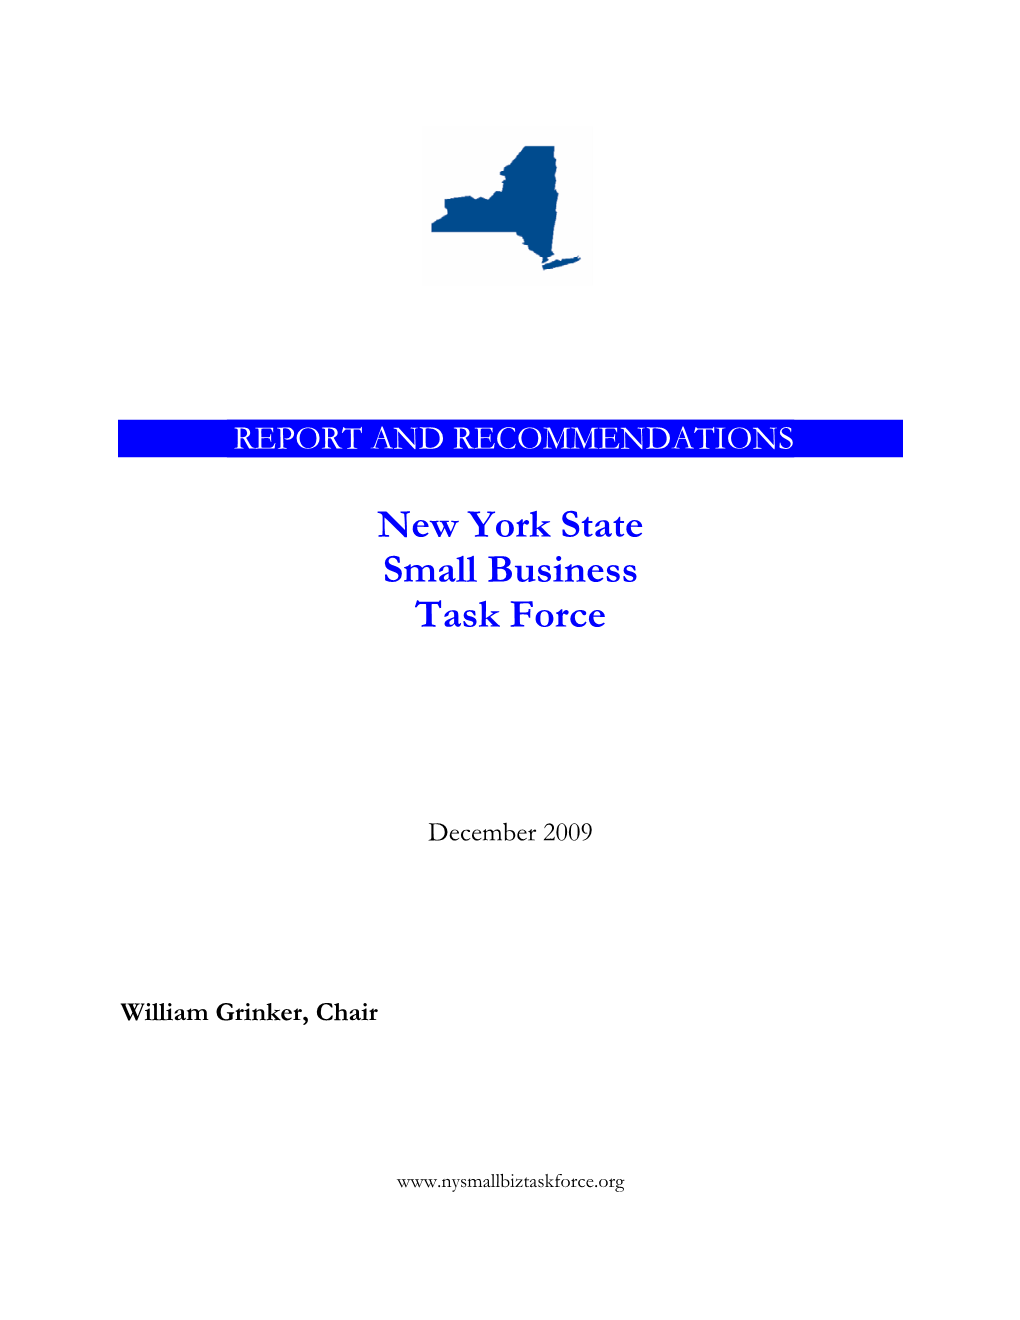 New York State Small Business Task Force